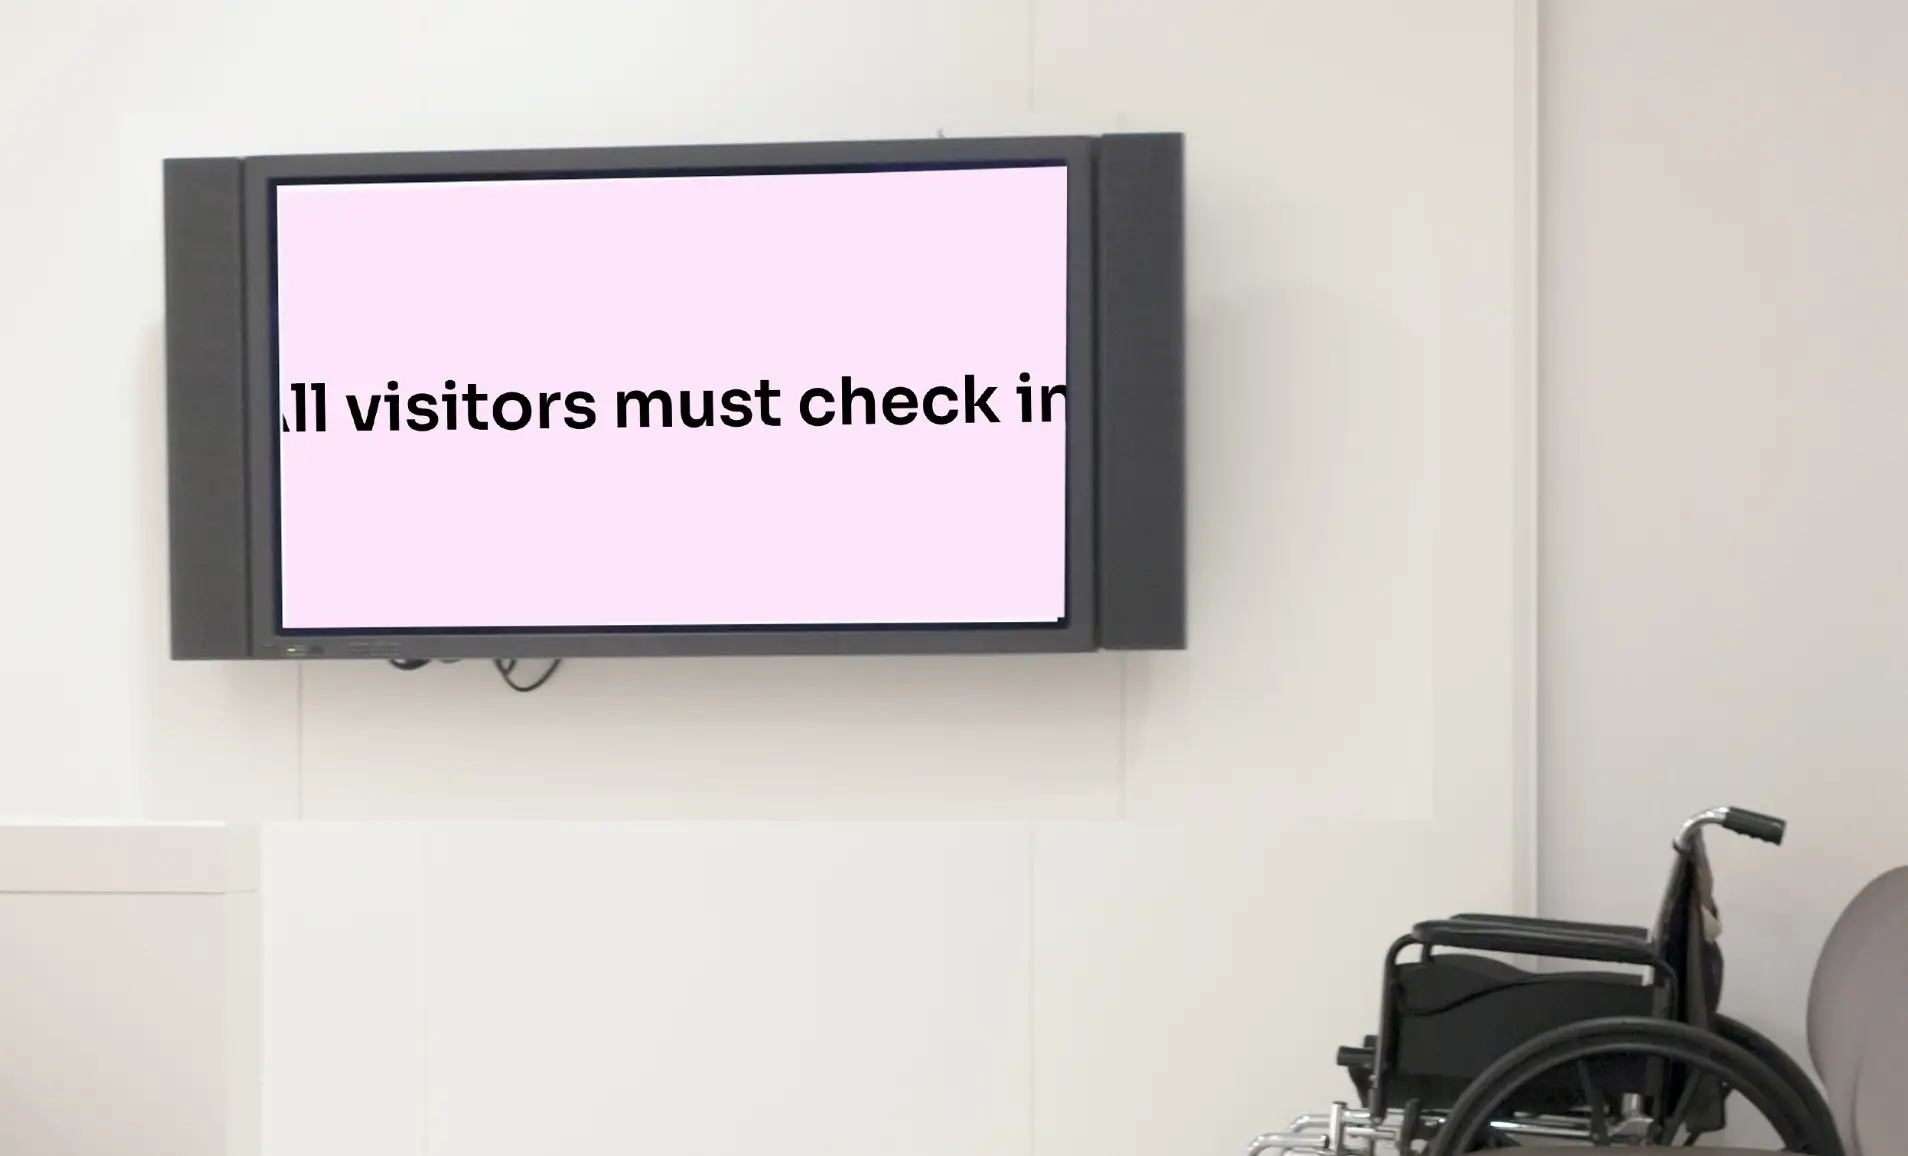 digital signage screen on a hospital lobby dispaying scrolling text about the hospital guidlines.